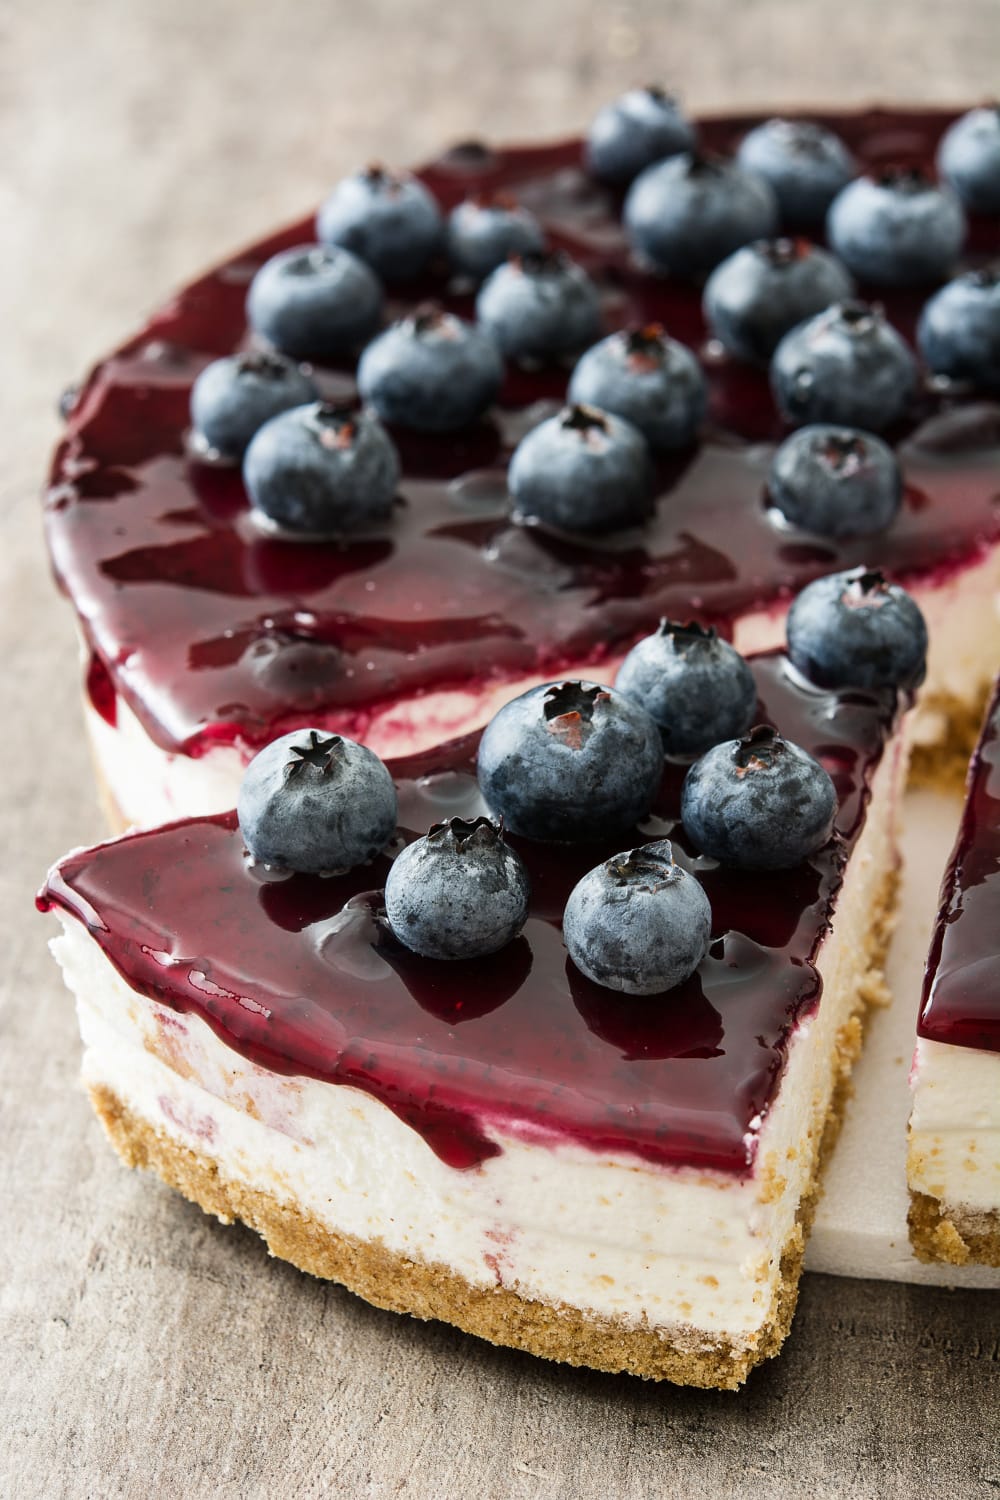 Sliced Whole Cheesecake Topped With Frozen Blueberries